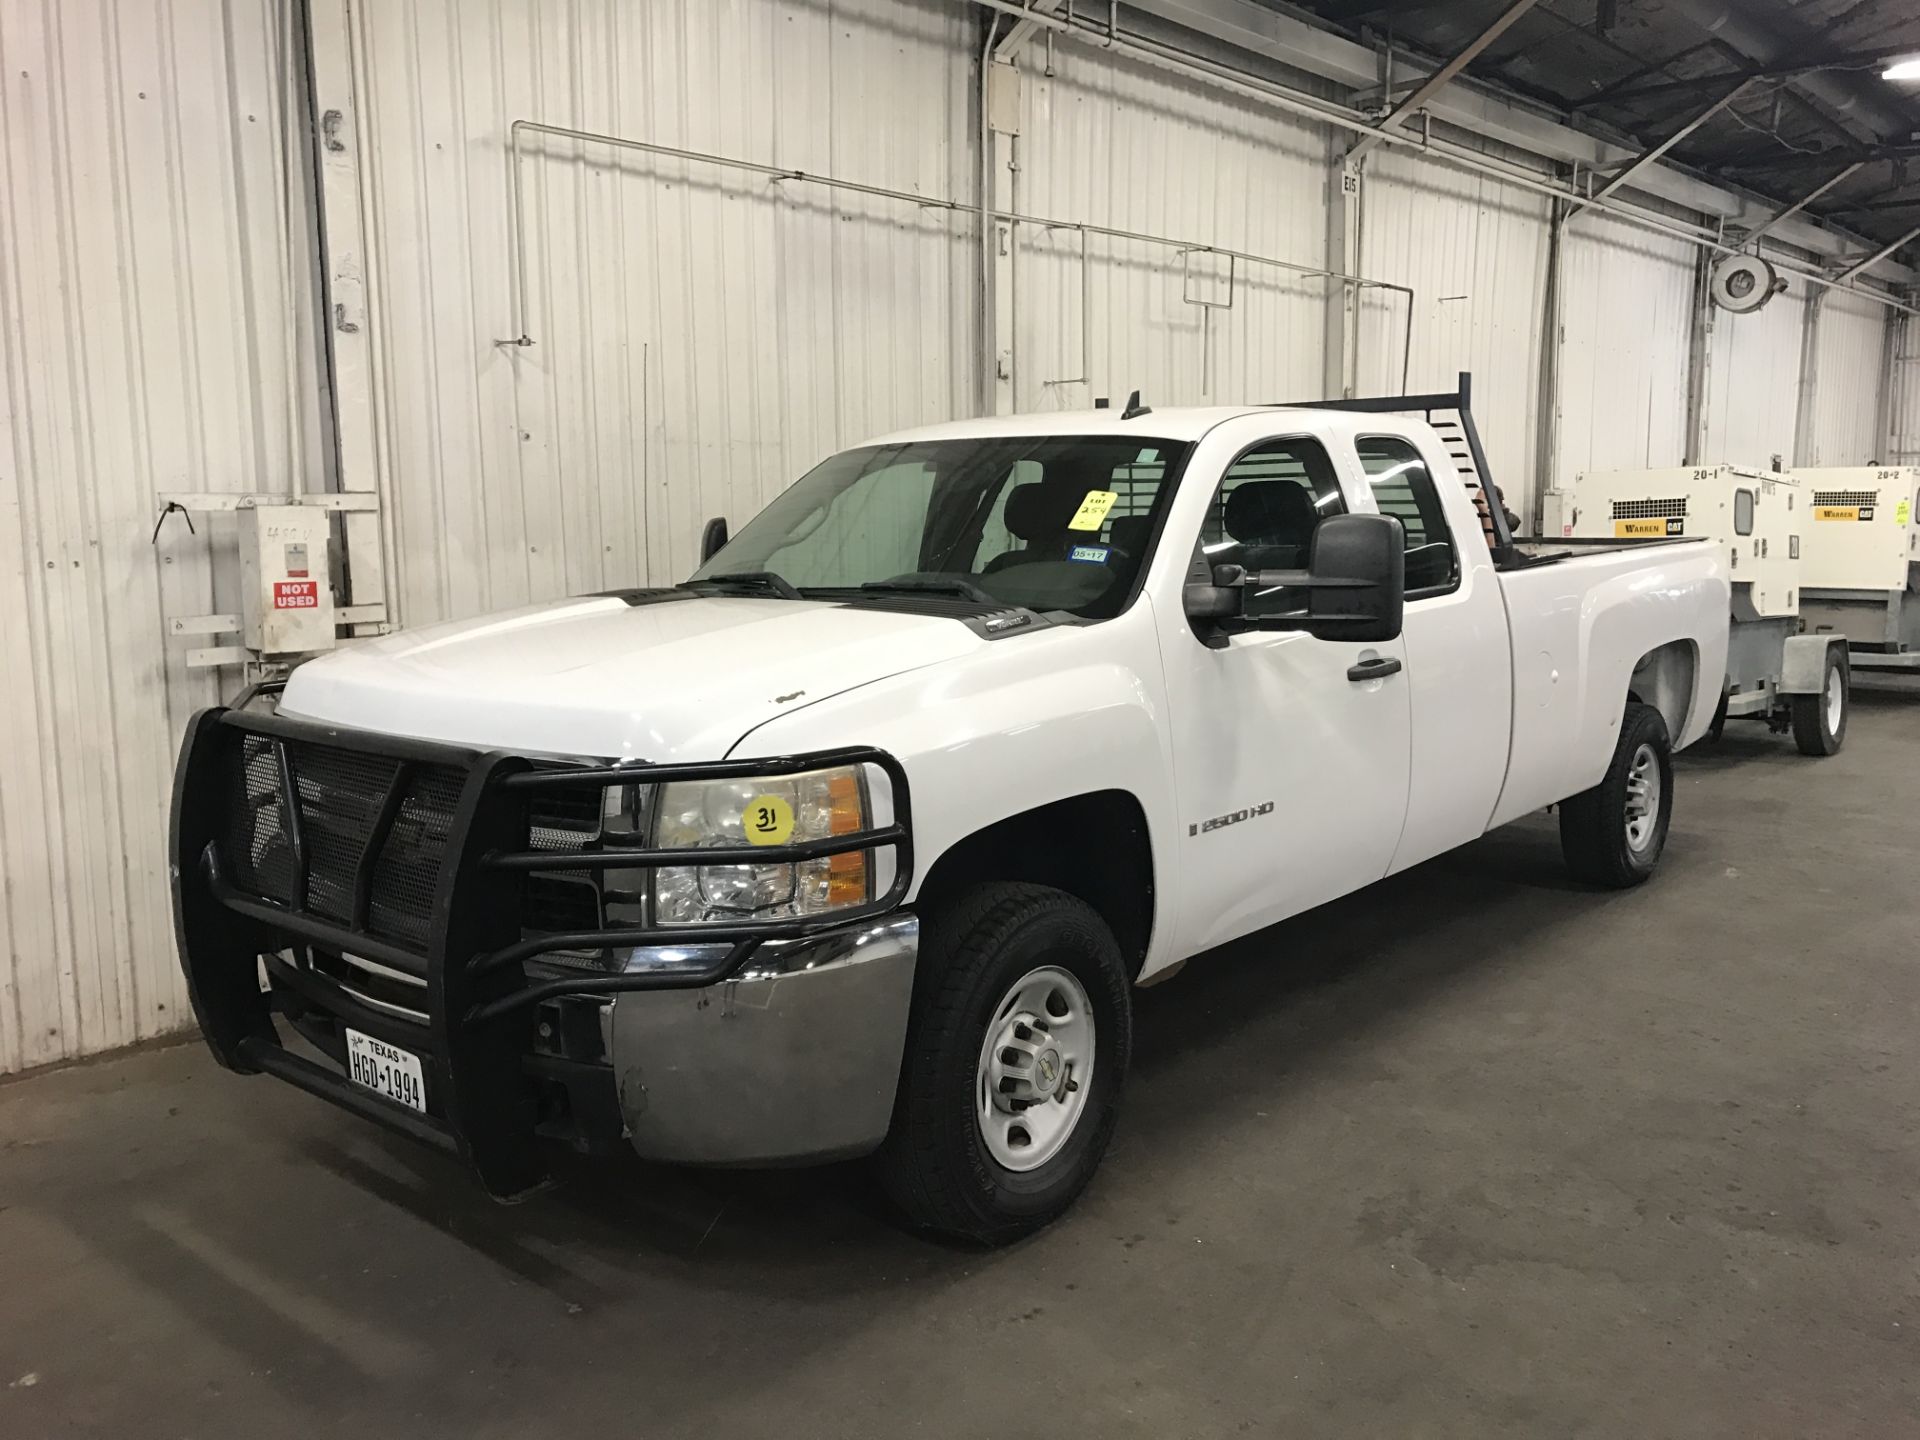 2008 CHEVY 2500 HD, GAS ENGINE, EXTRA CAB, LONG BED, FUEL TANK IN BED